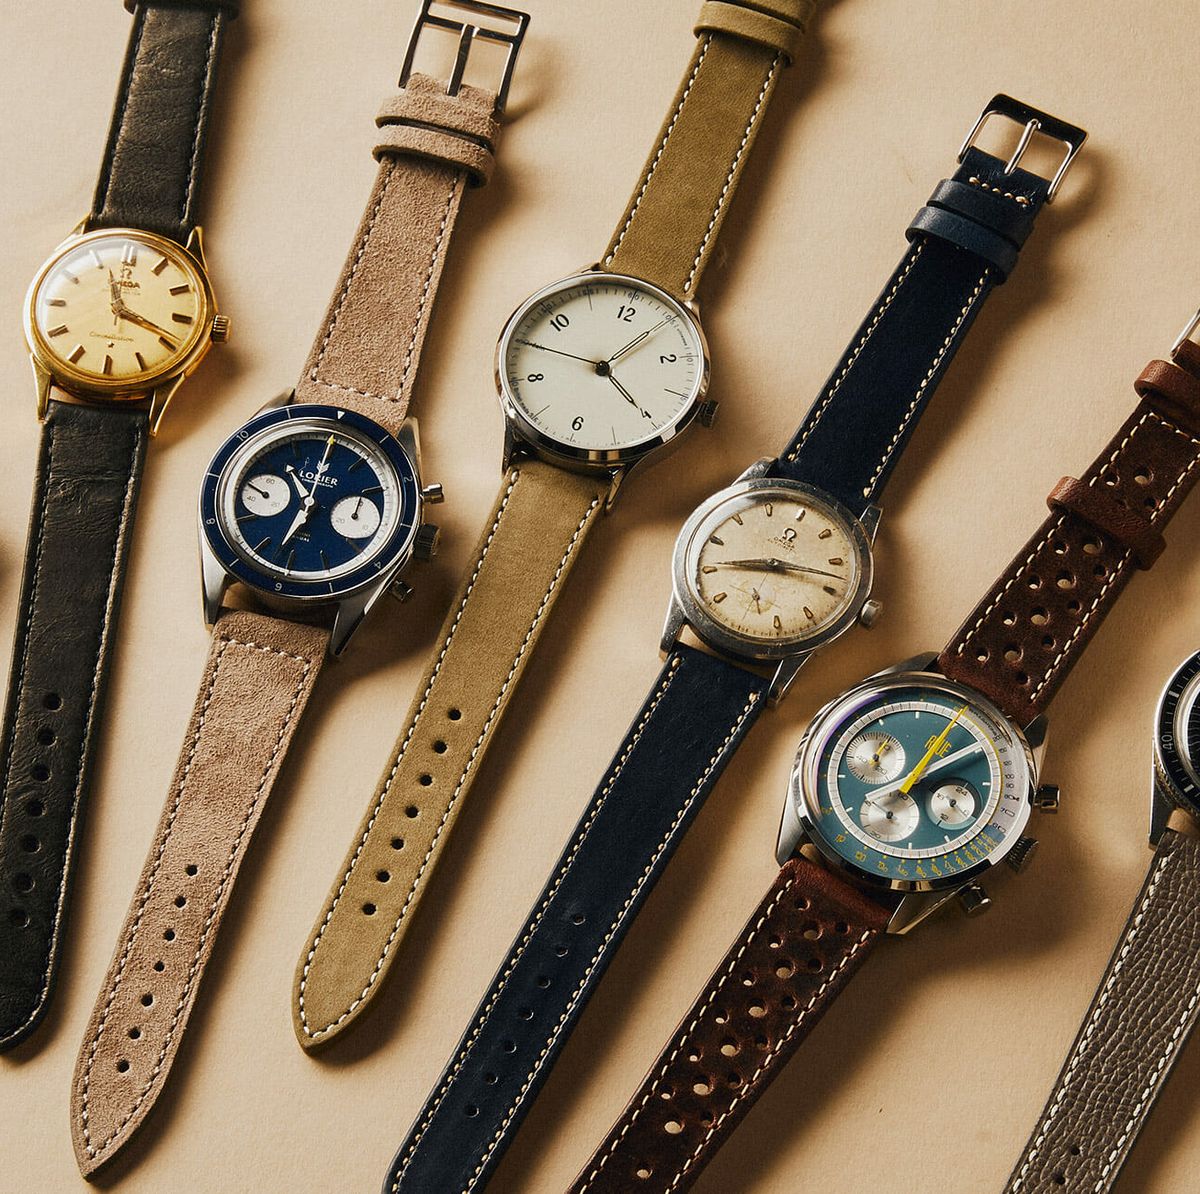 Leather Watch Straps You Can Buy